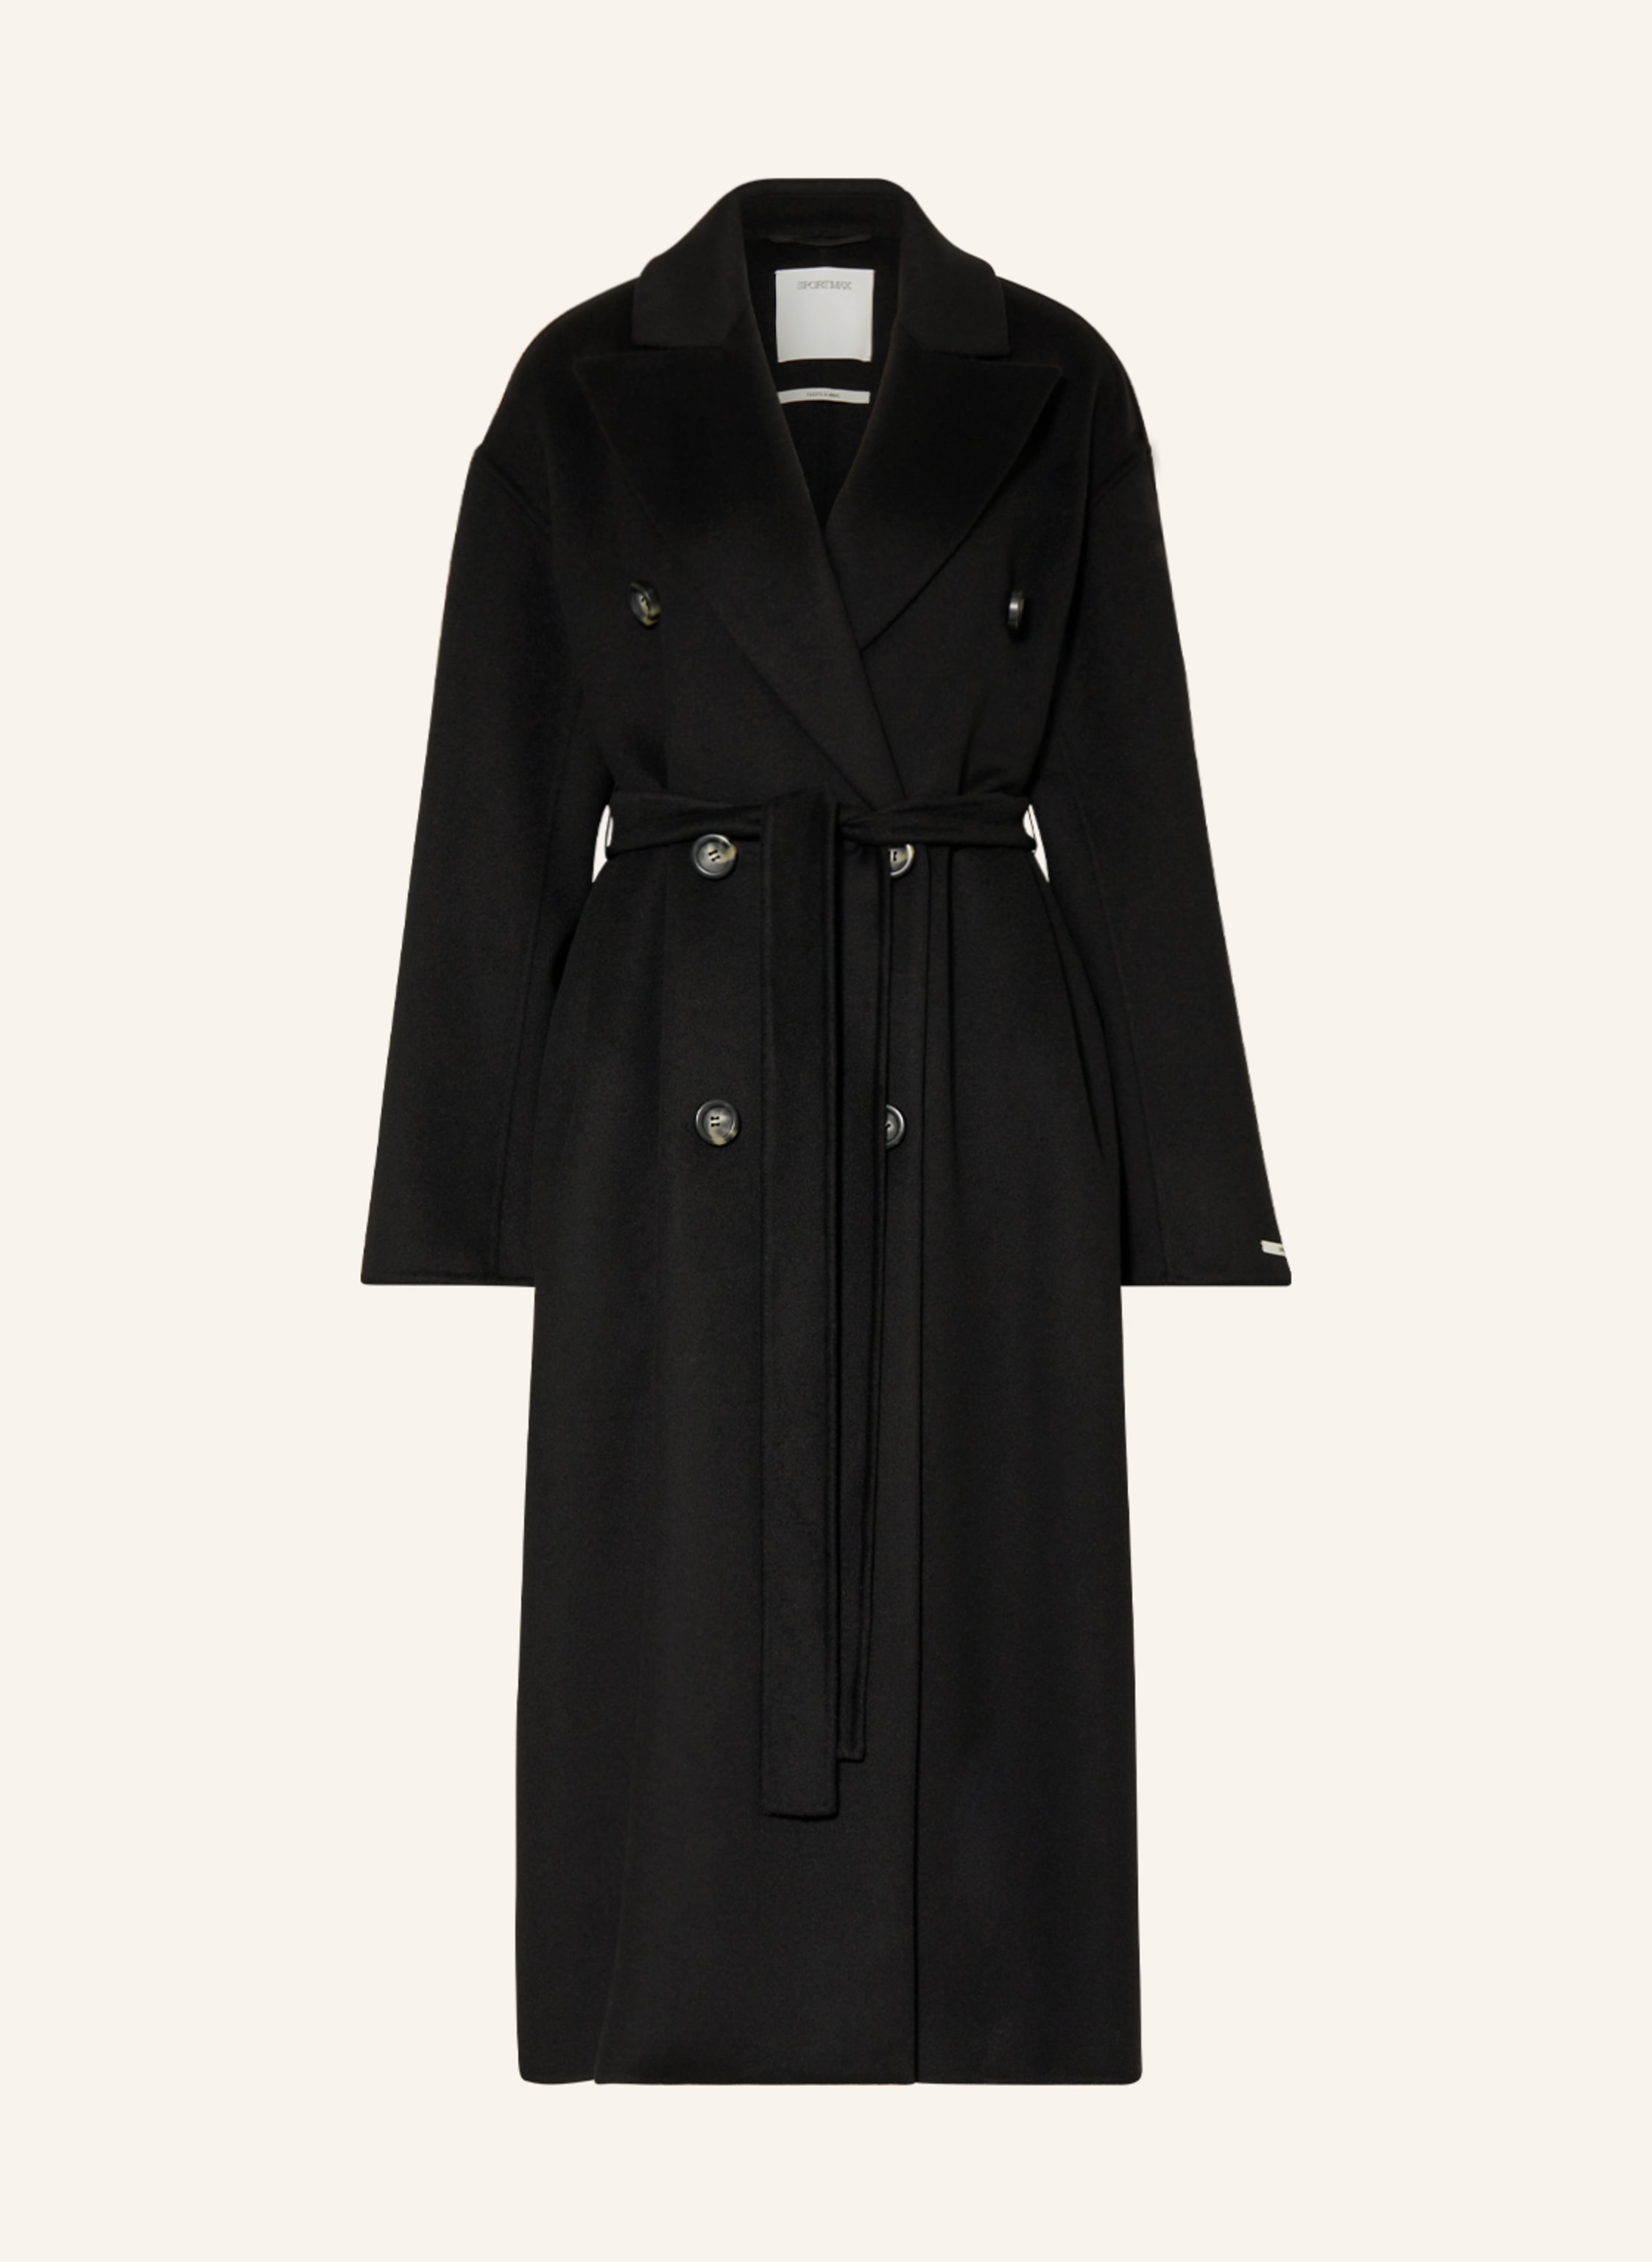 Sportmax double-breasted wool coat - Neutrals